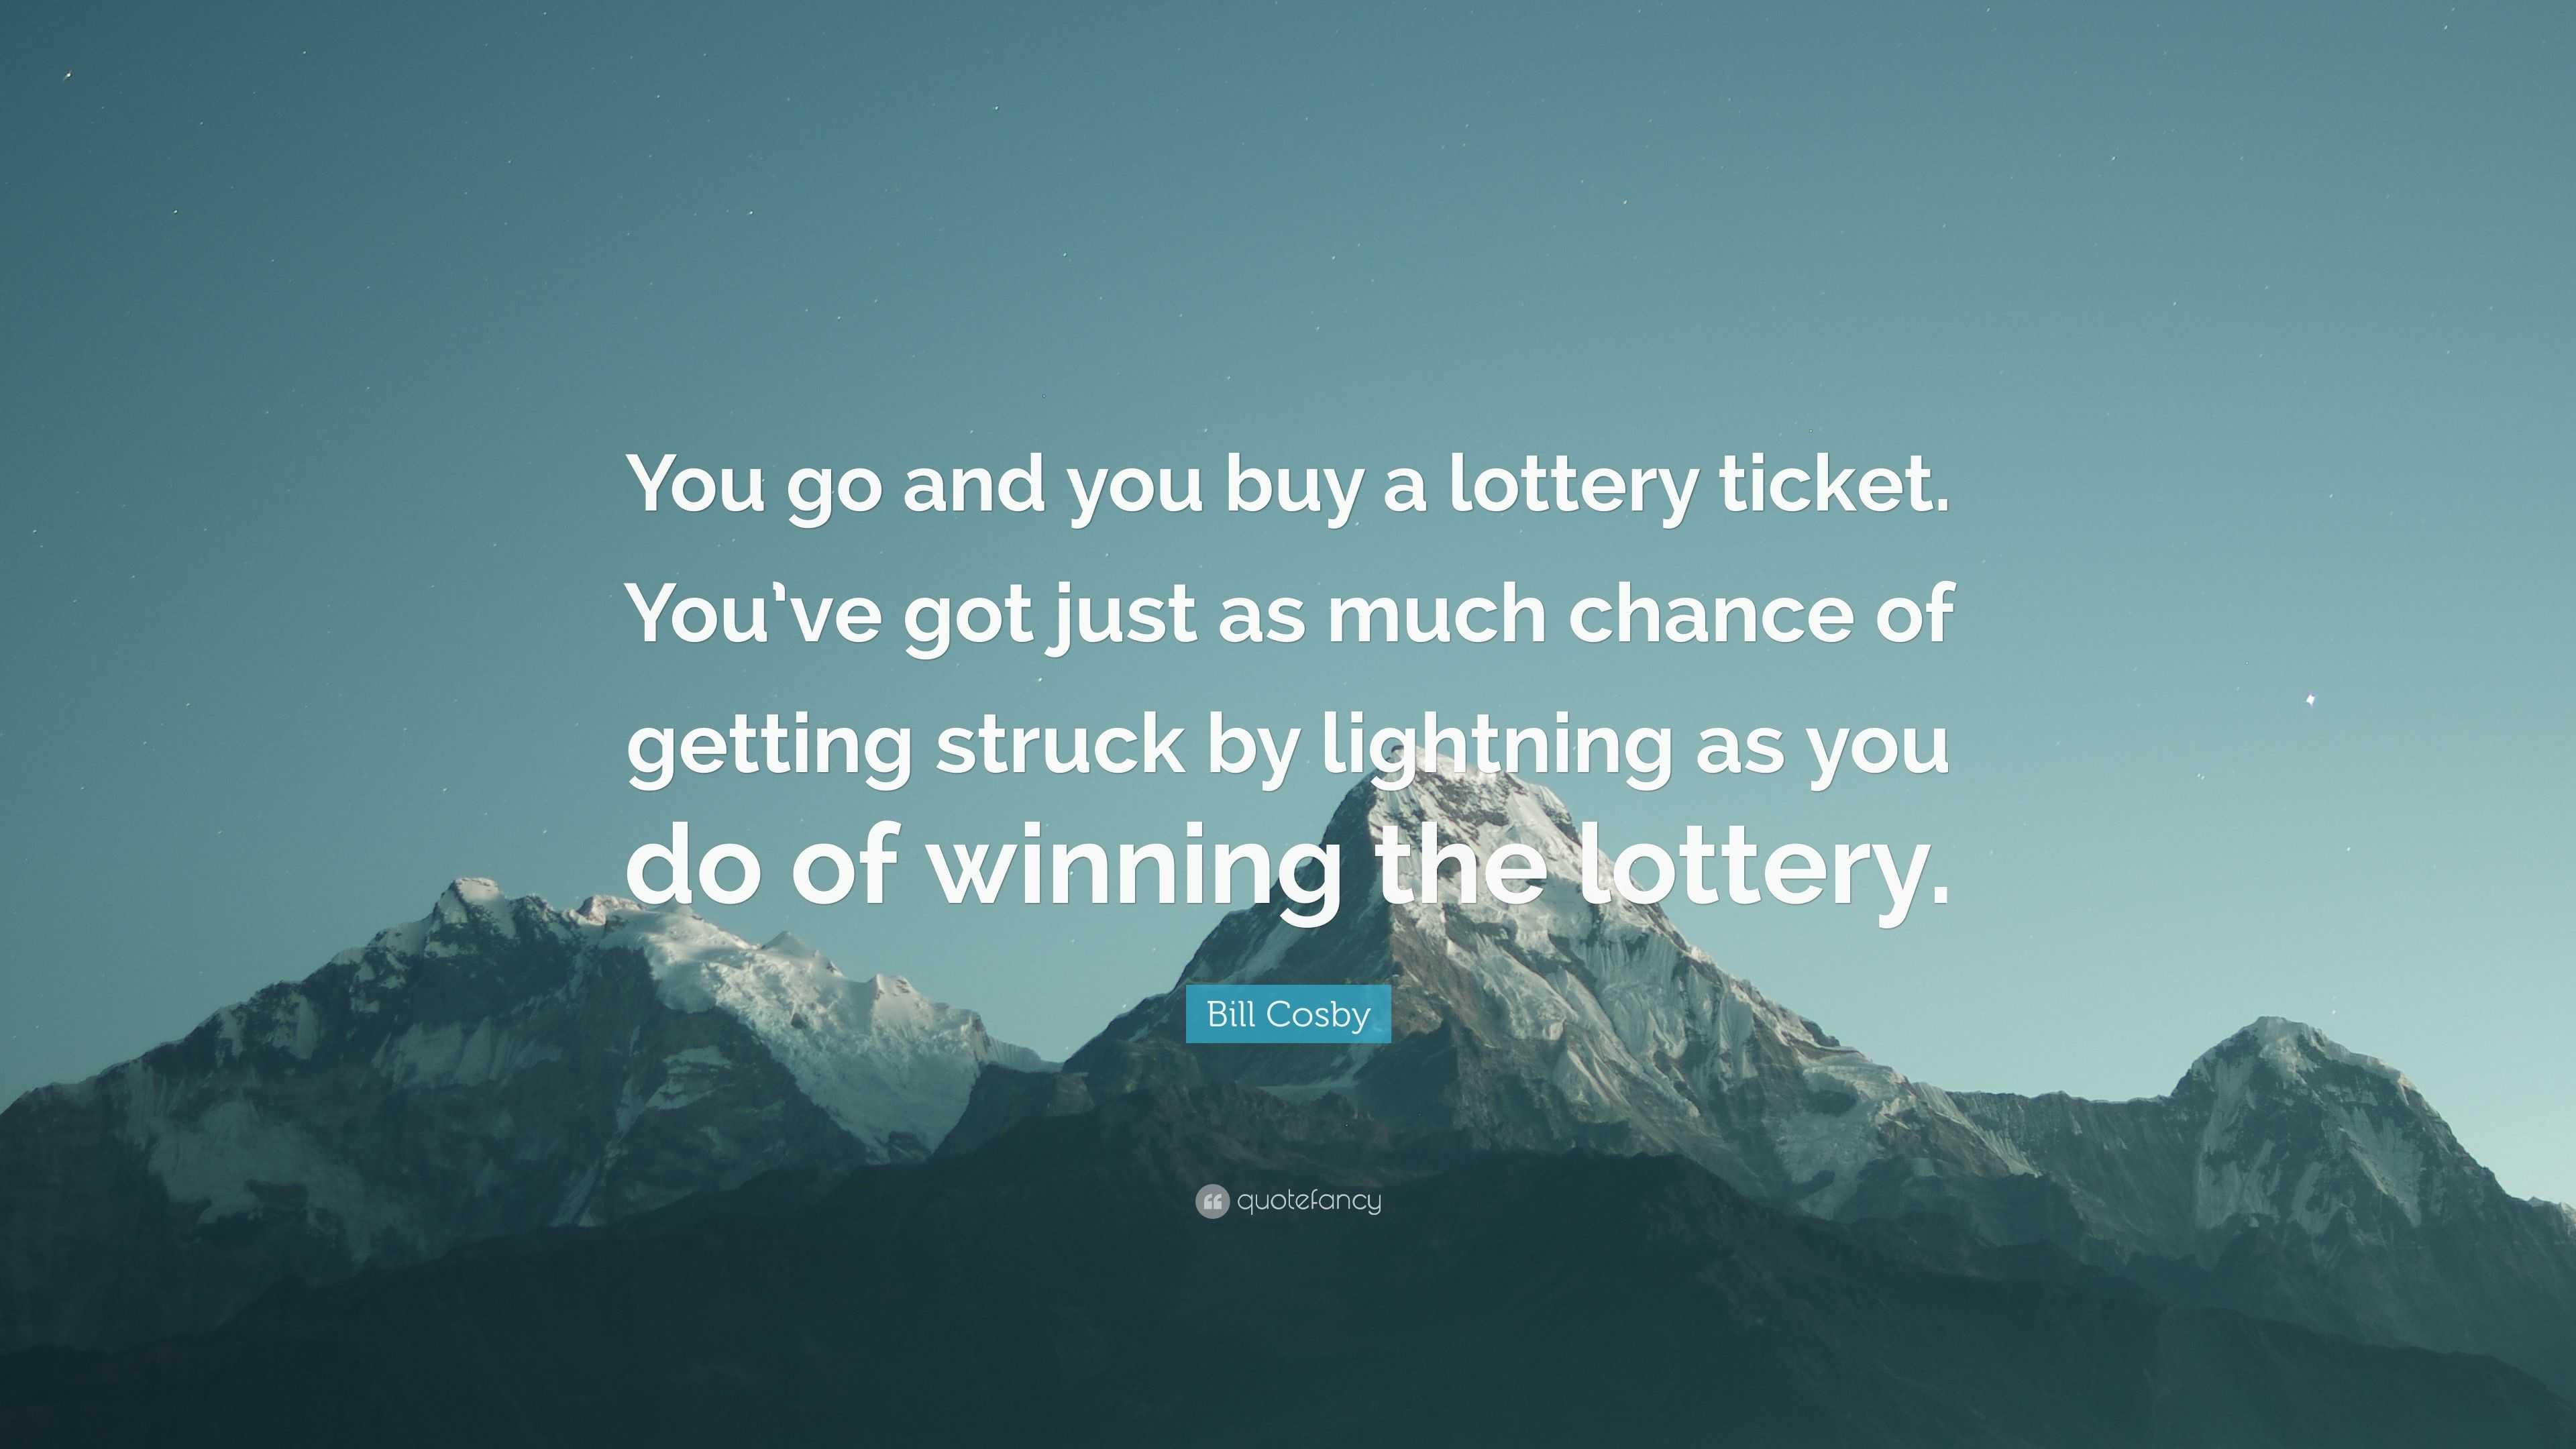 Bill Cosby Quote: “You go and you buy a lottery ticket. You've got just as  much chance of getting struck by lightning as you do of winning ...”